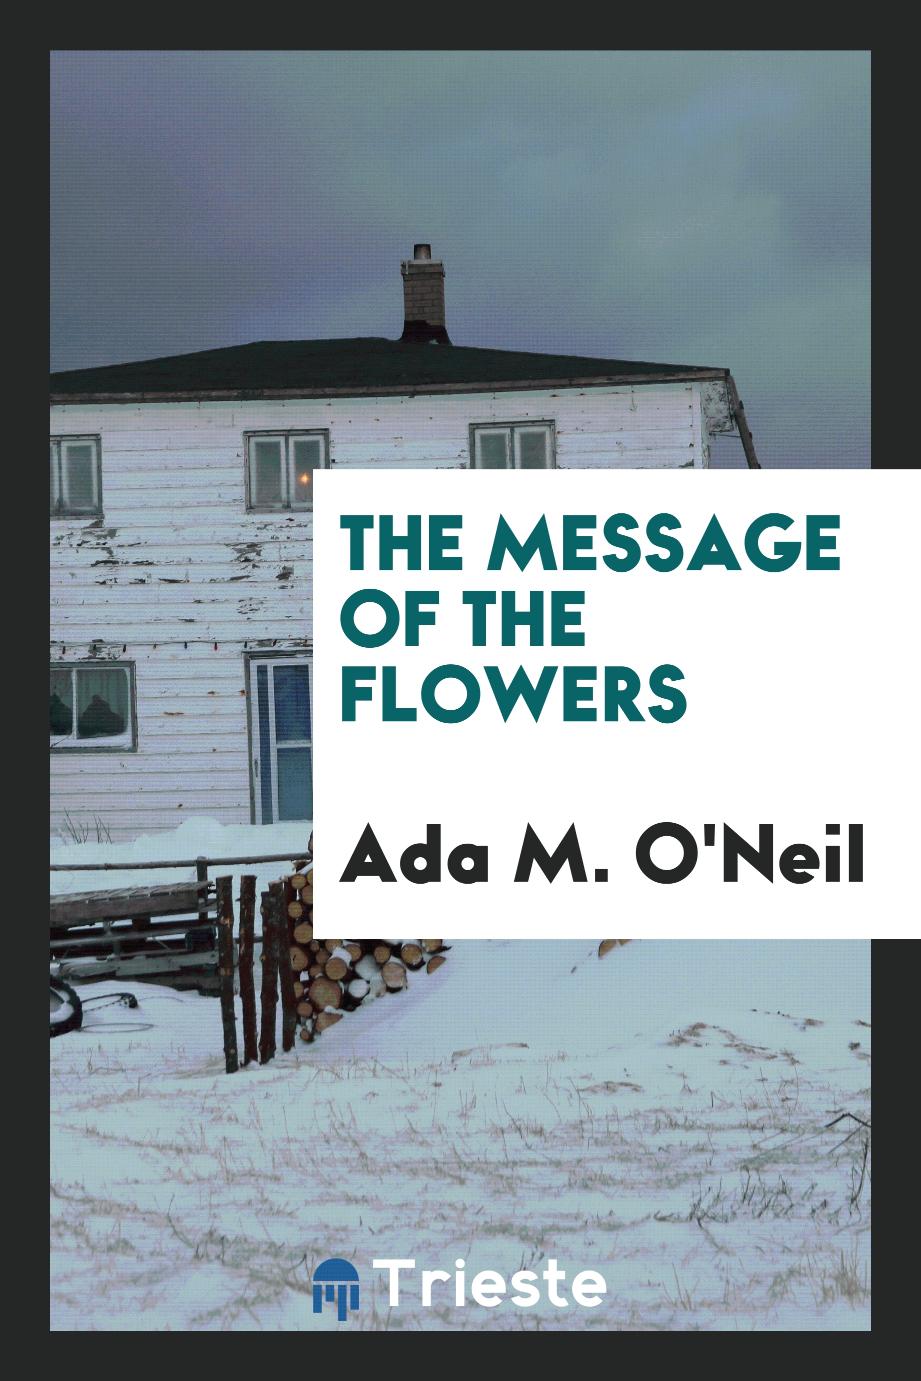 The Message of the Flowers